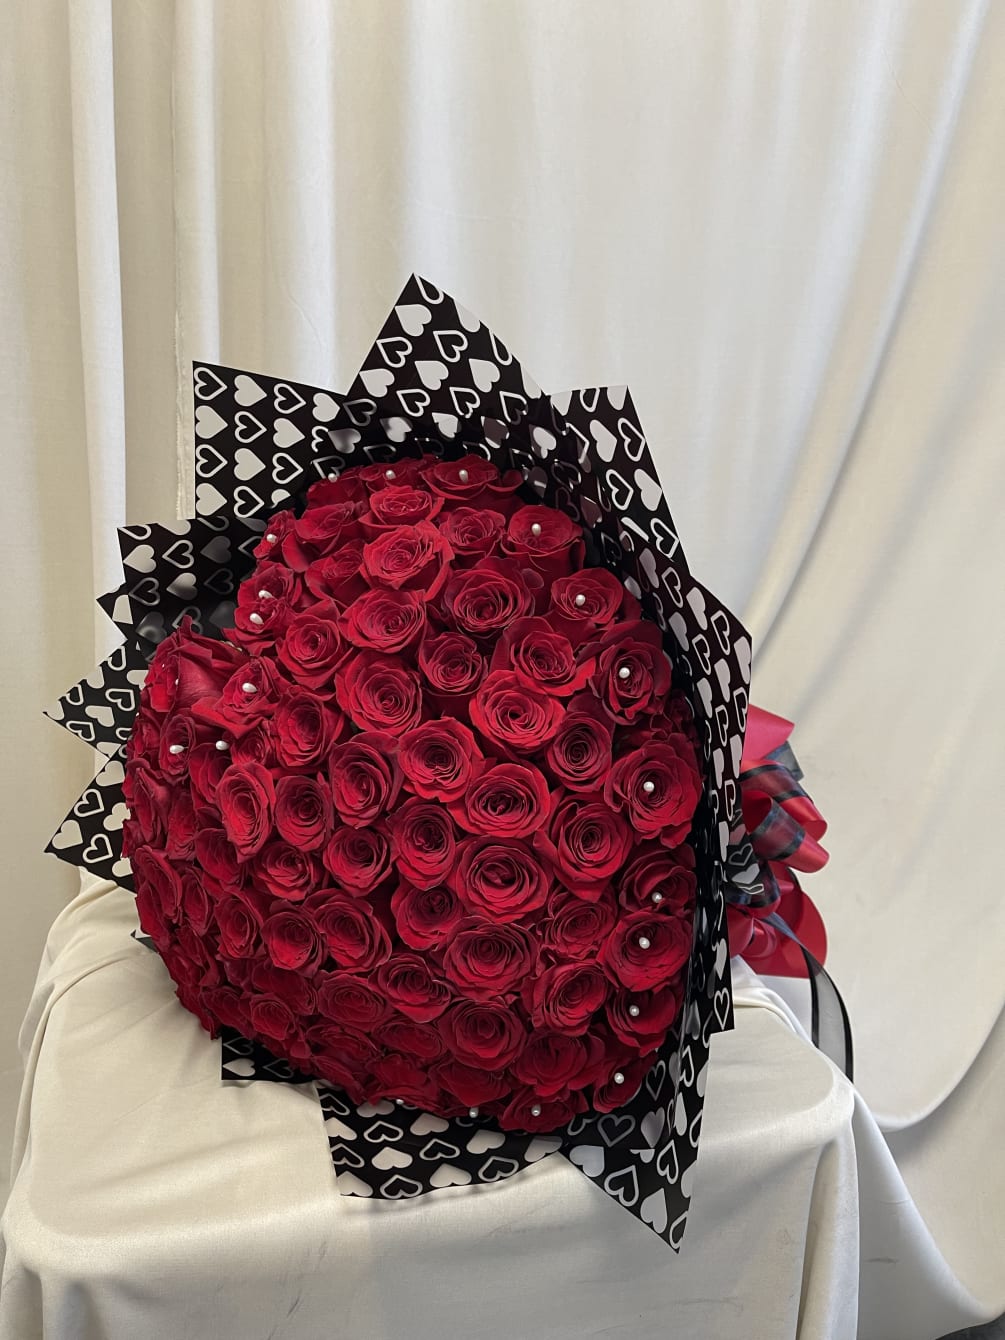 100 Premium red roses in a heart shape with pearl outline
Very fancy